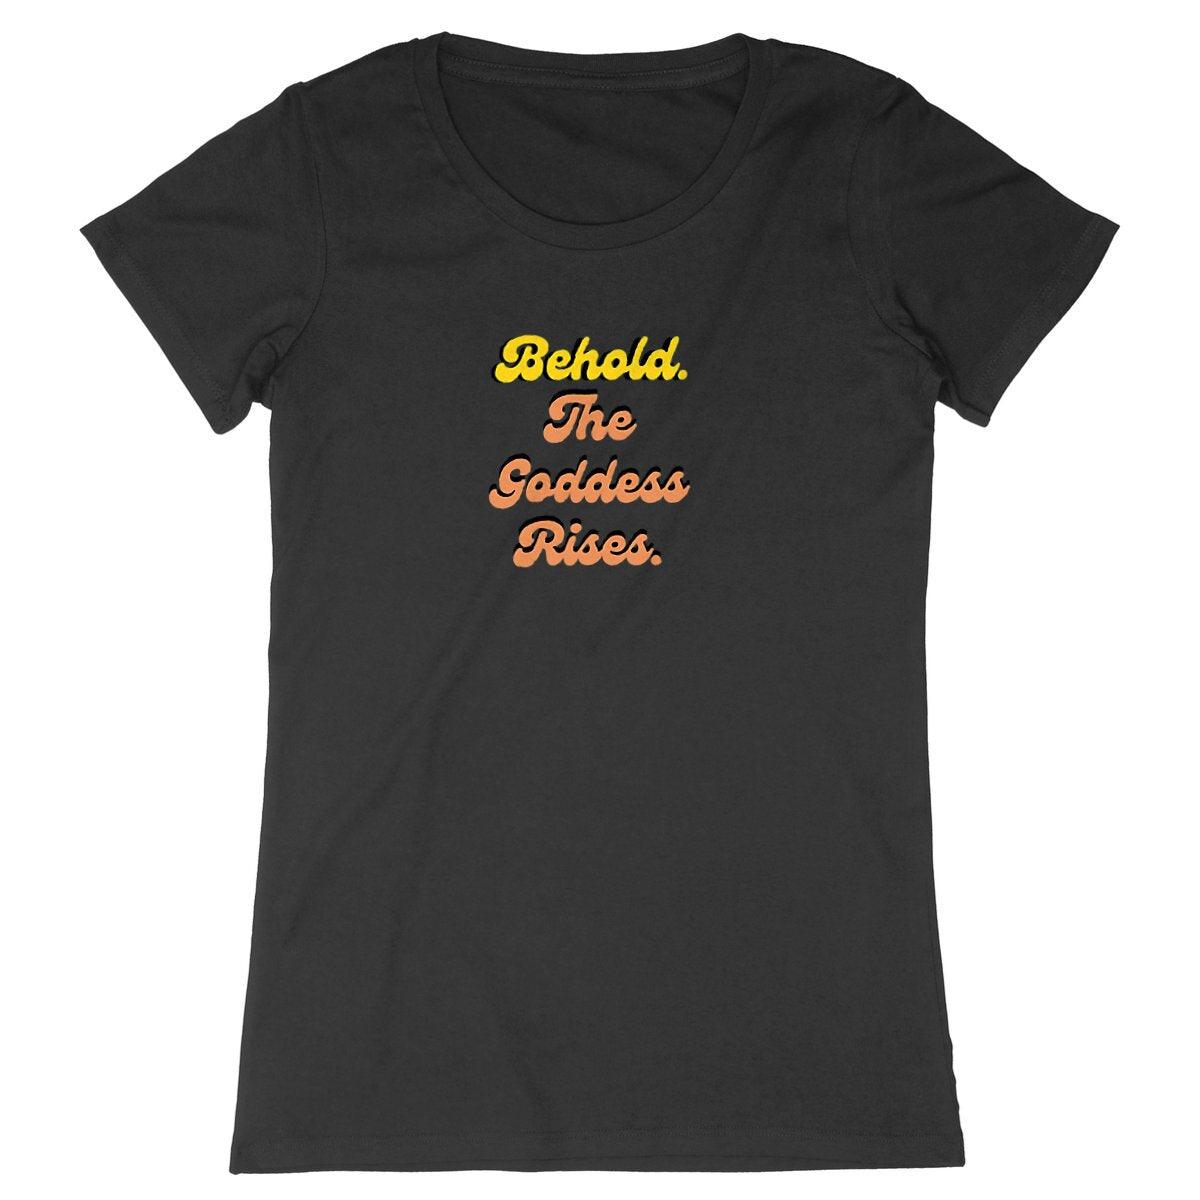 Goddess Rises Premium Plus 100% organic cotton woman's T-shirt, designed by Tree of Life Art, combines eco-friendly fashion with empowering design.